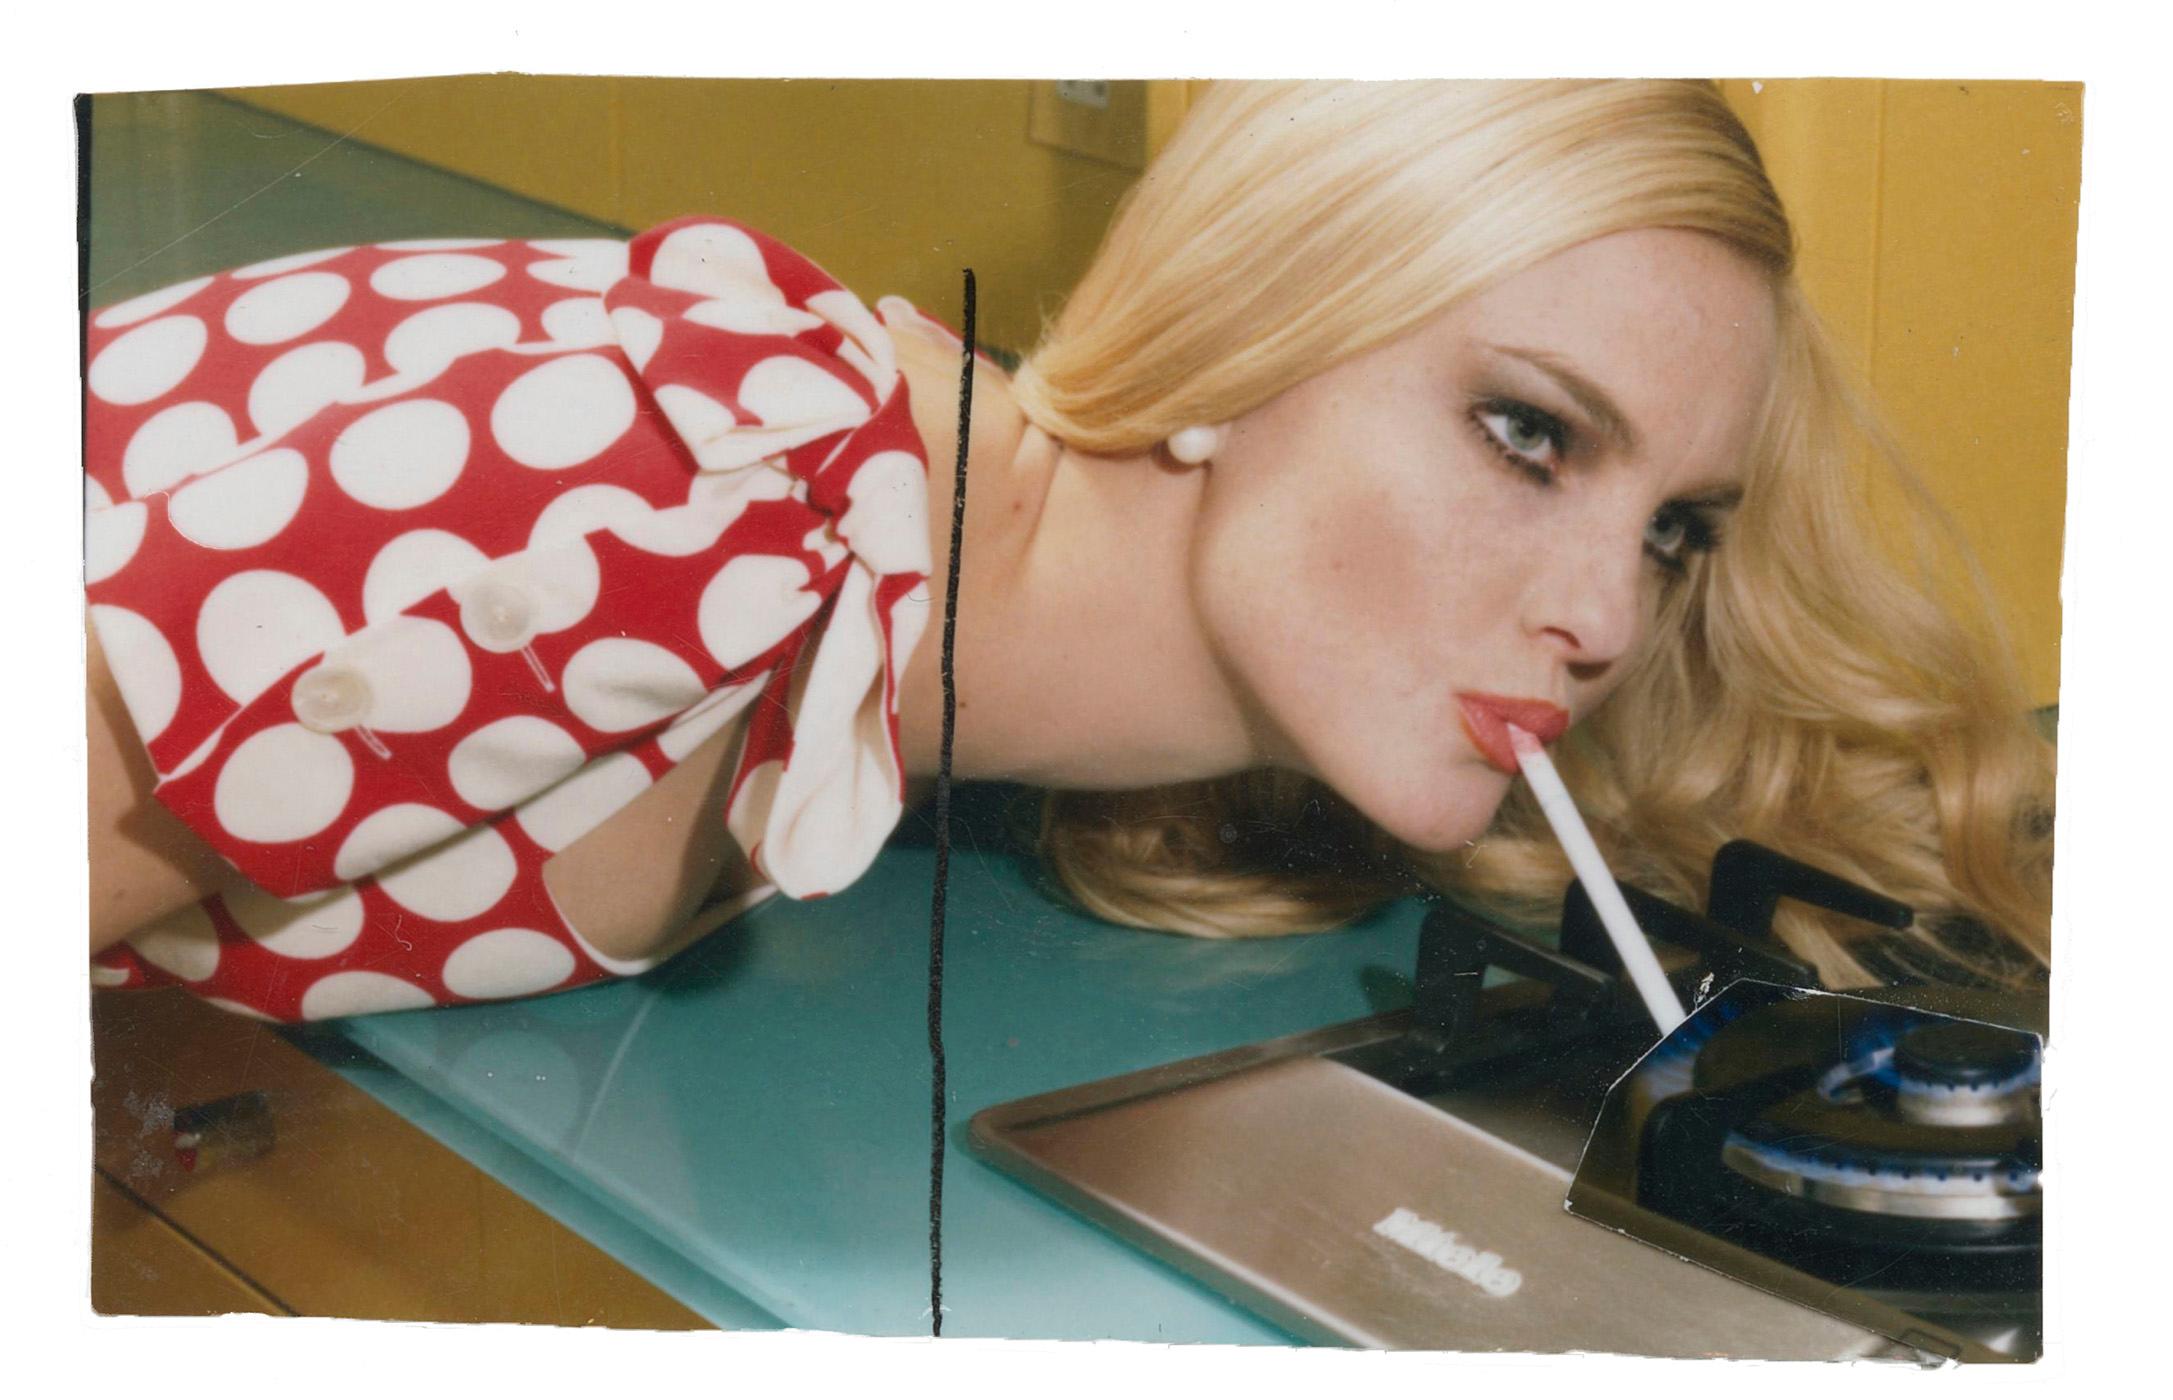 Home Works - study XI, 2008 - Miles Aldridge (Colour Photography)
Unique Polaroid print
Signed in ink on reverse
1 1/4 x 2 inches

Miles Aldridge (born 1964) is one of Britain’s most celebrated fashion photographers, who has worked for a number of